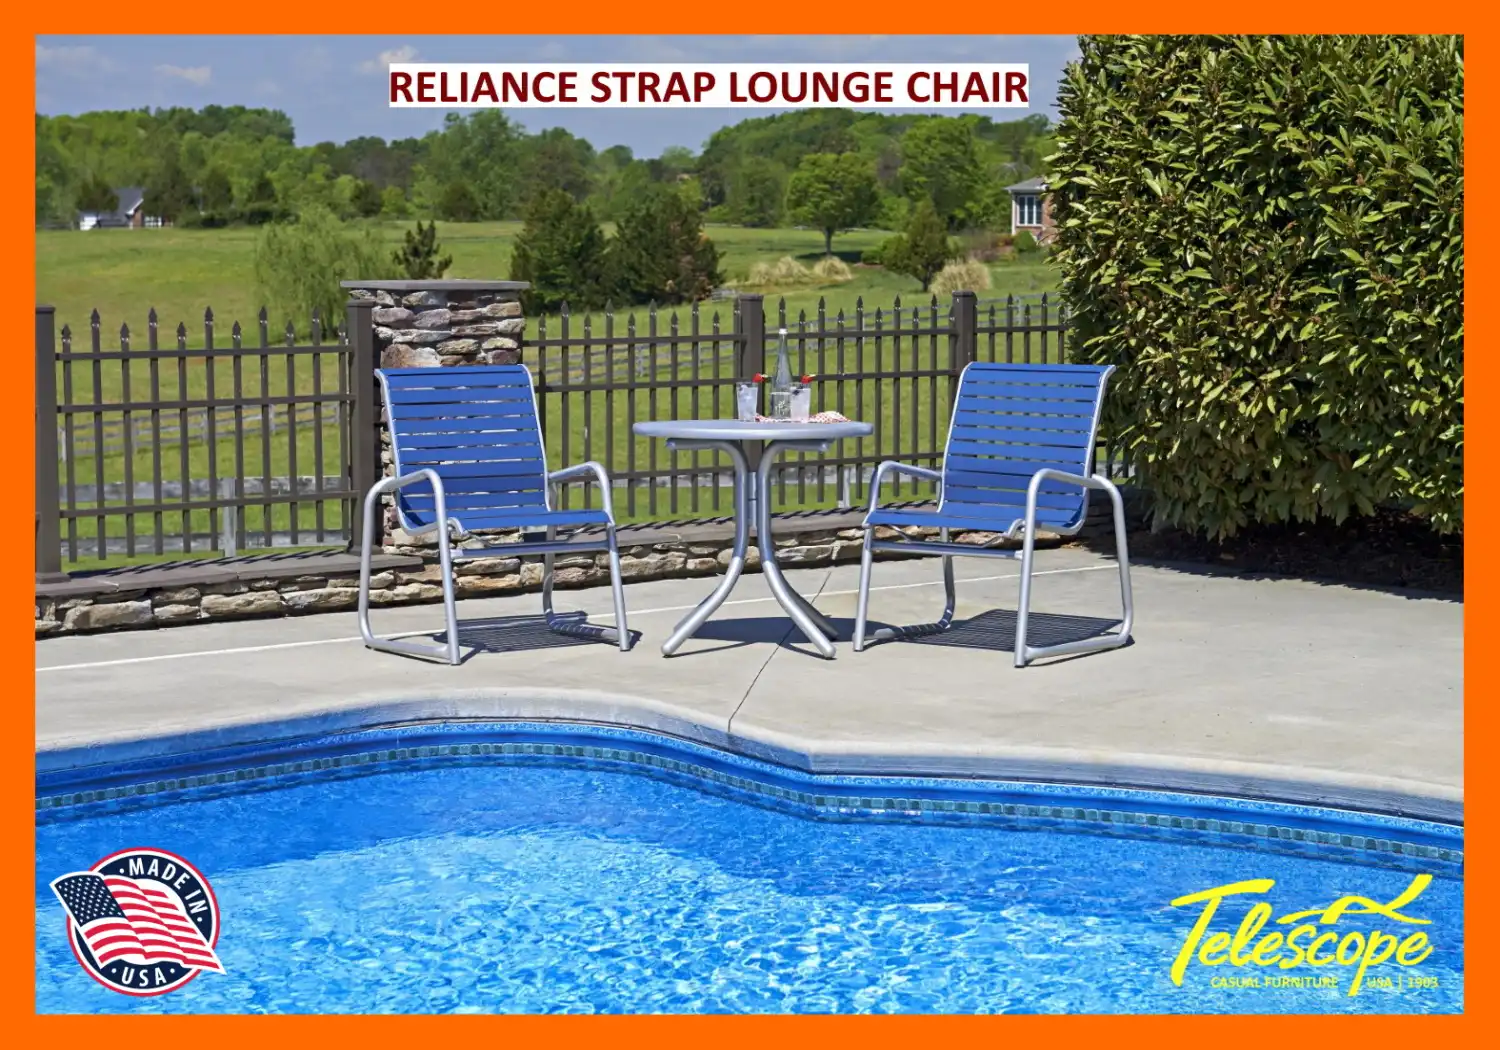 RELIANCE STRAP LOUNGE CHAIR